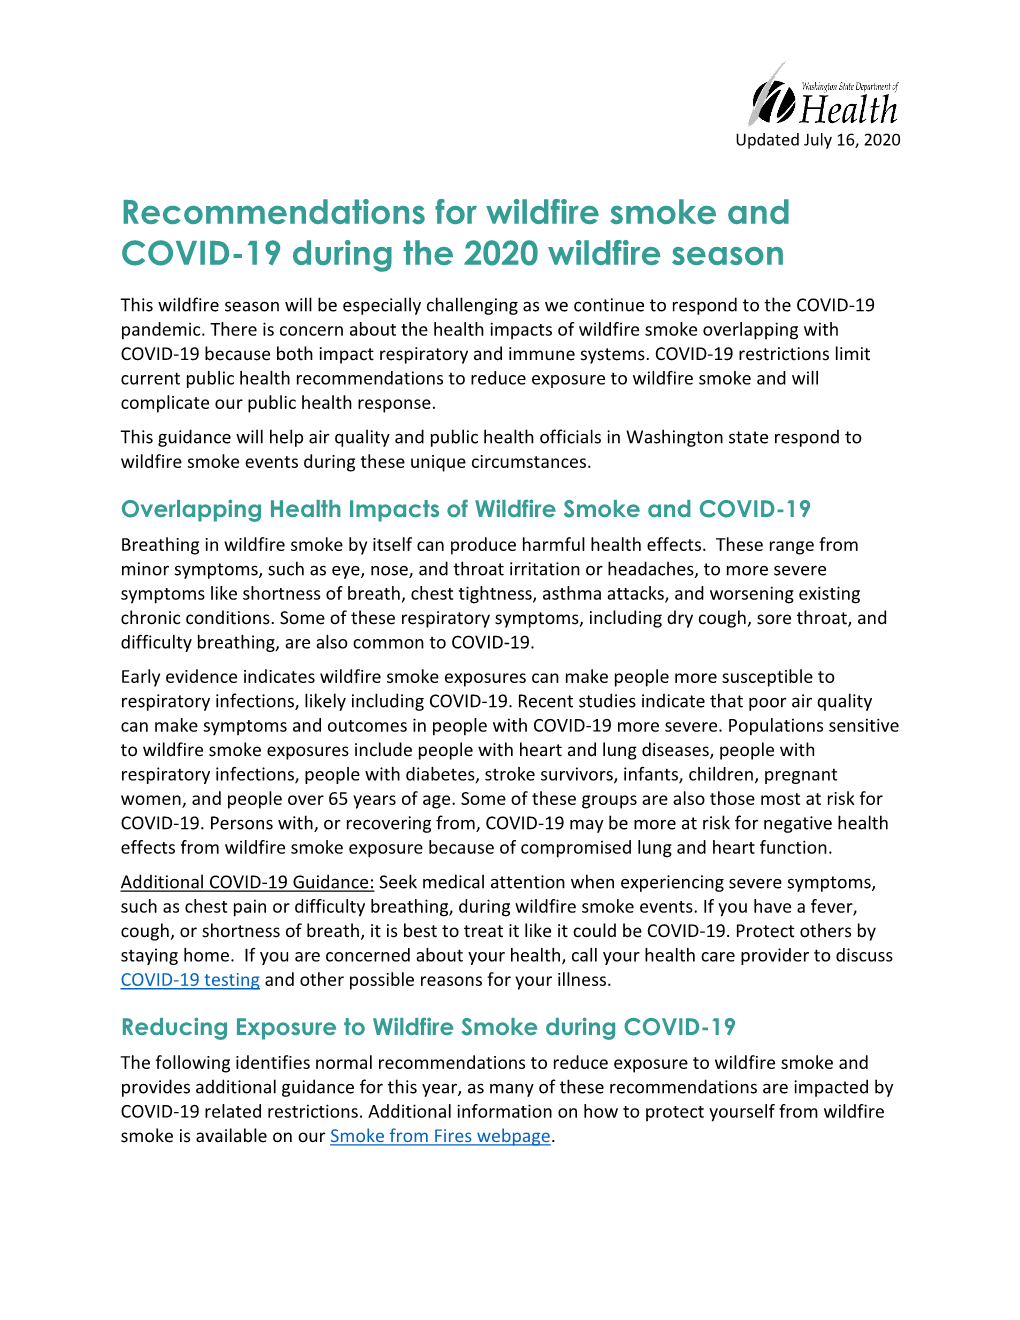 Recommendations for Wildfire Smoke and COVID-19 During the 2020 Wildfire Season